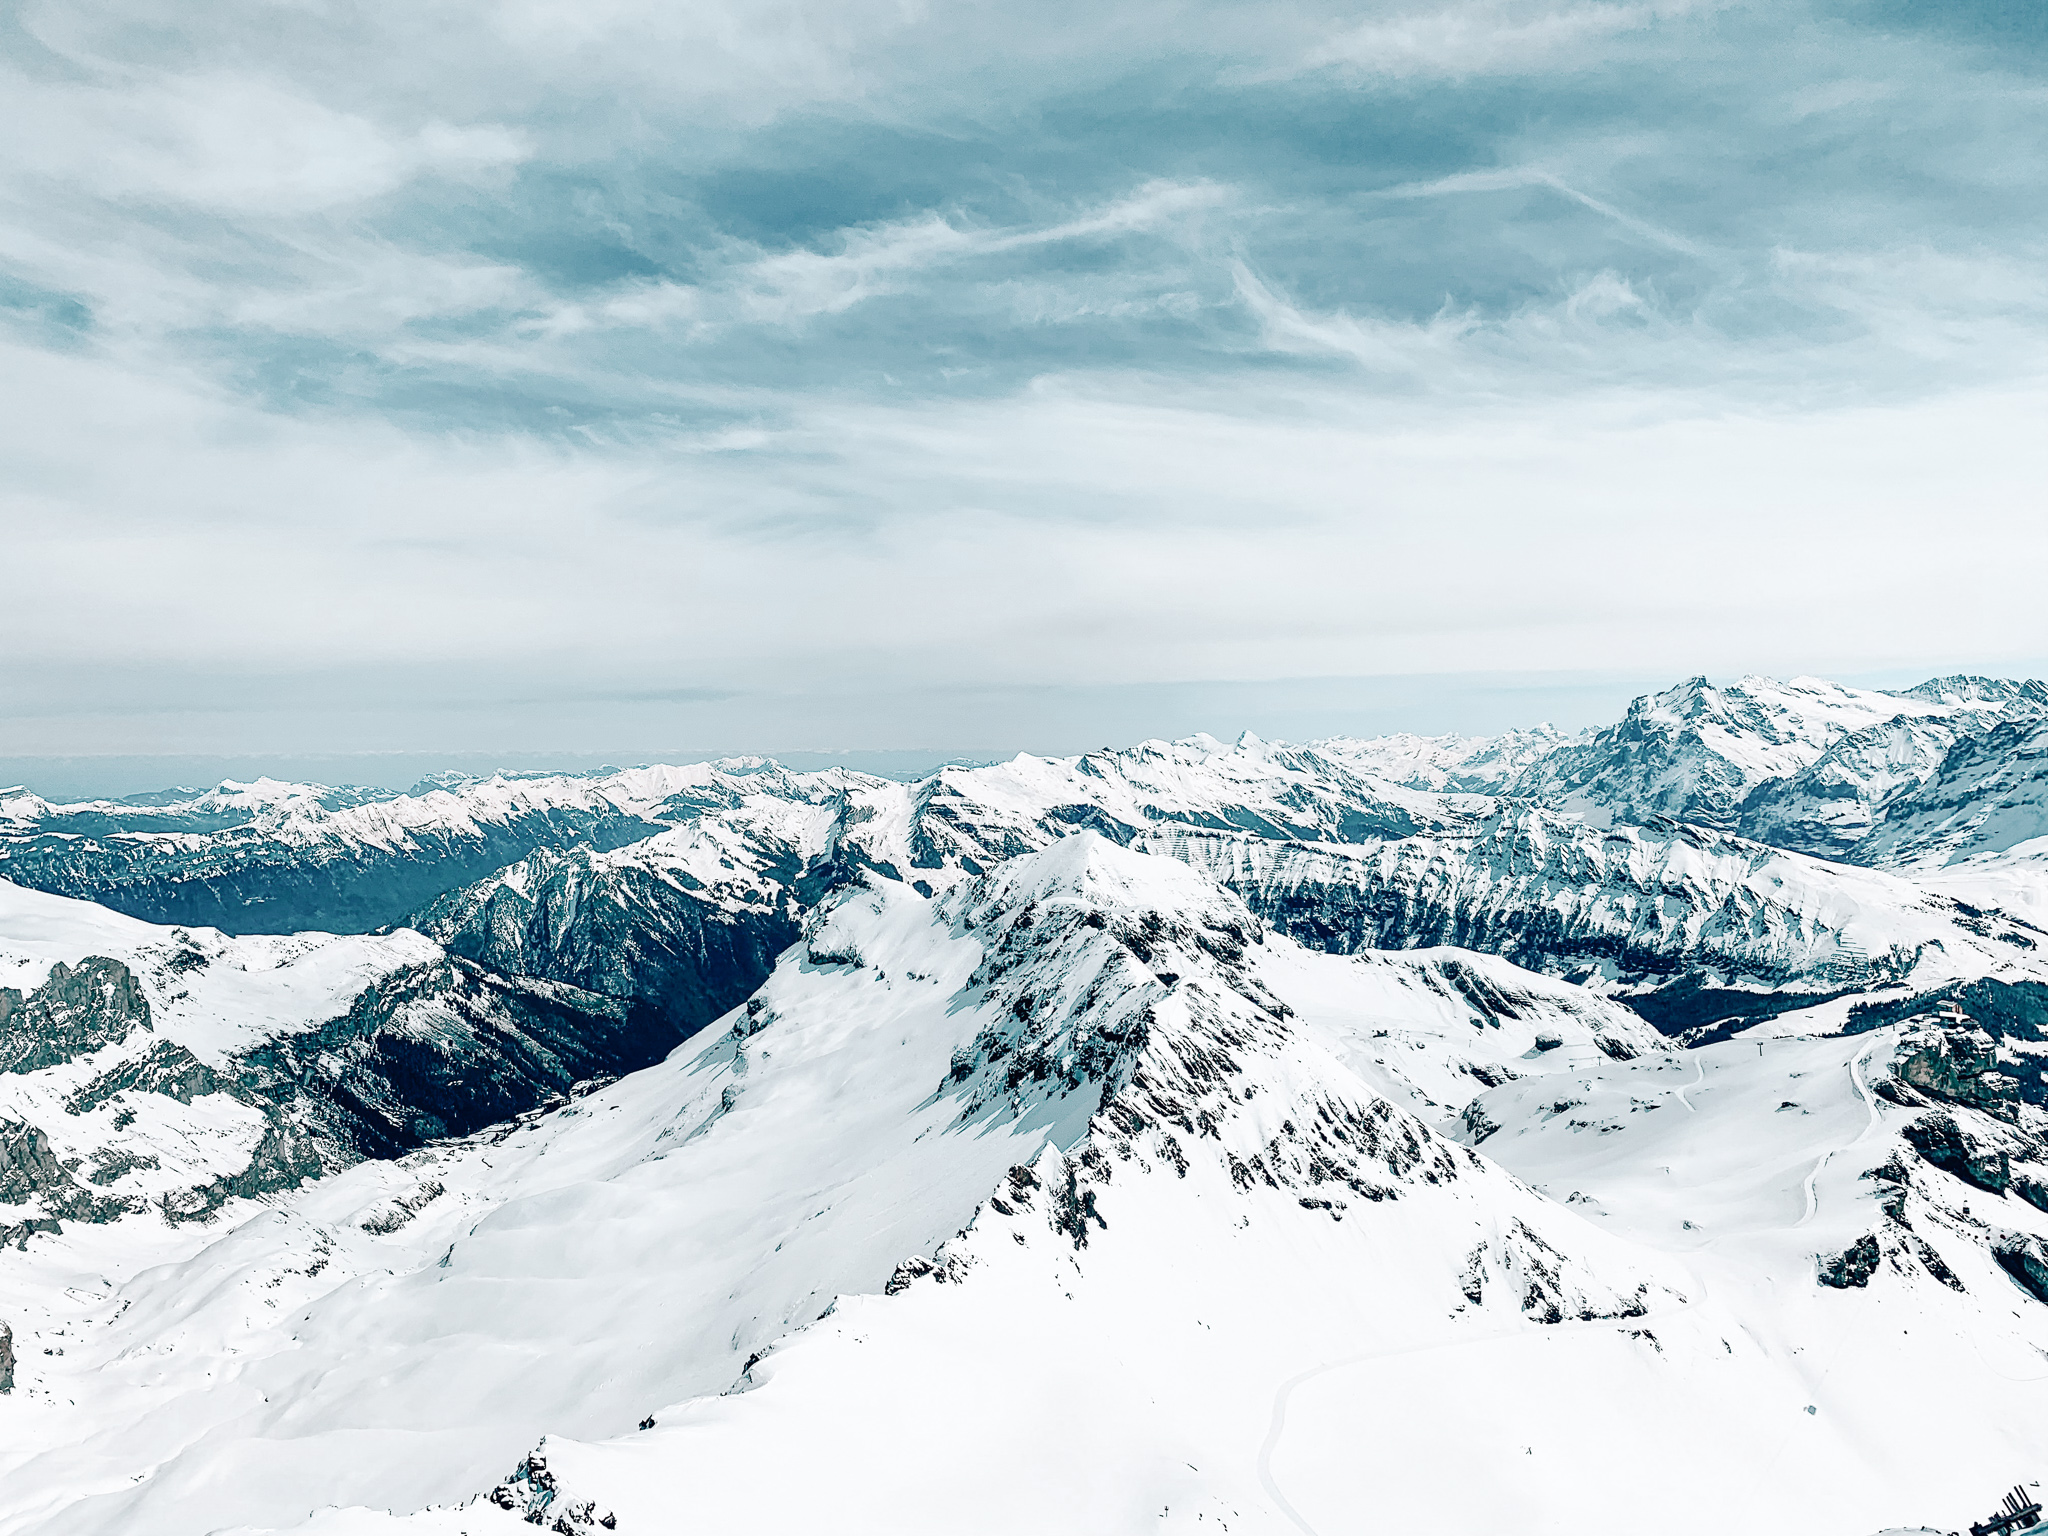 A view of many mountains in the Swiss Alps as viewed from Mount Schilthorn ski resort on a winter day.